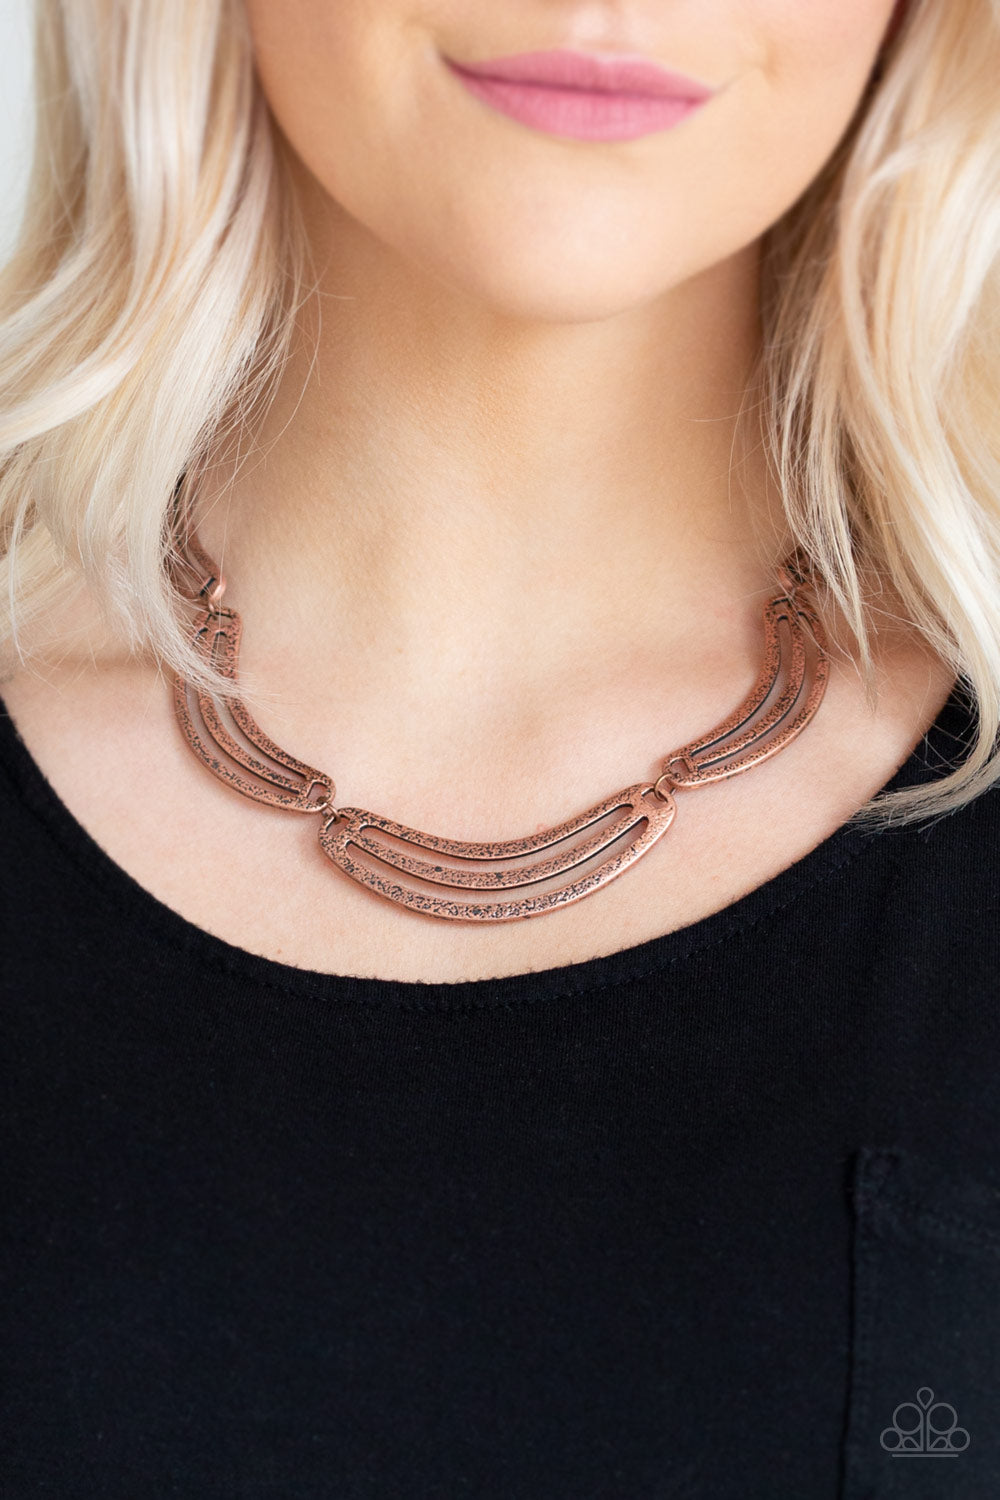 Paparazzi Necklaces - Palm Springs Pharaoh - Copper